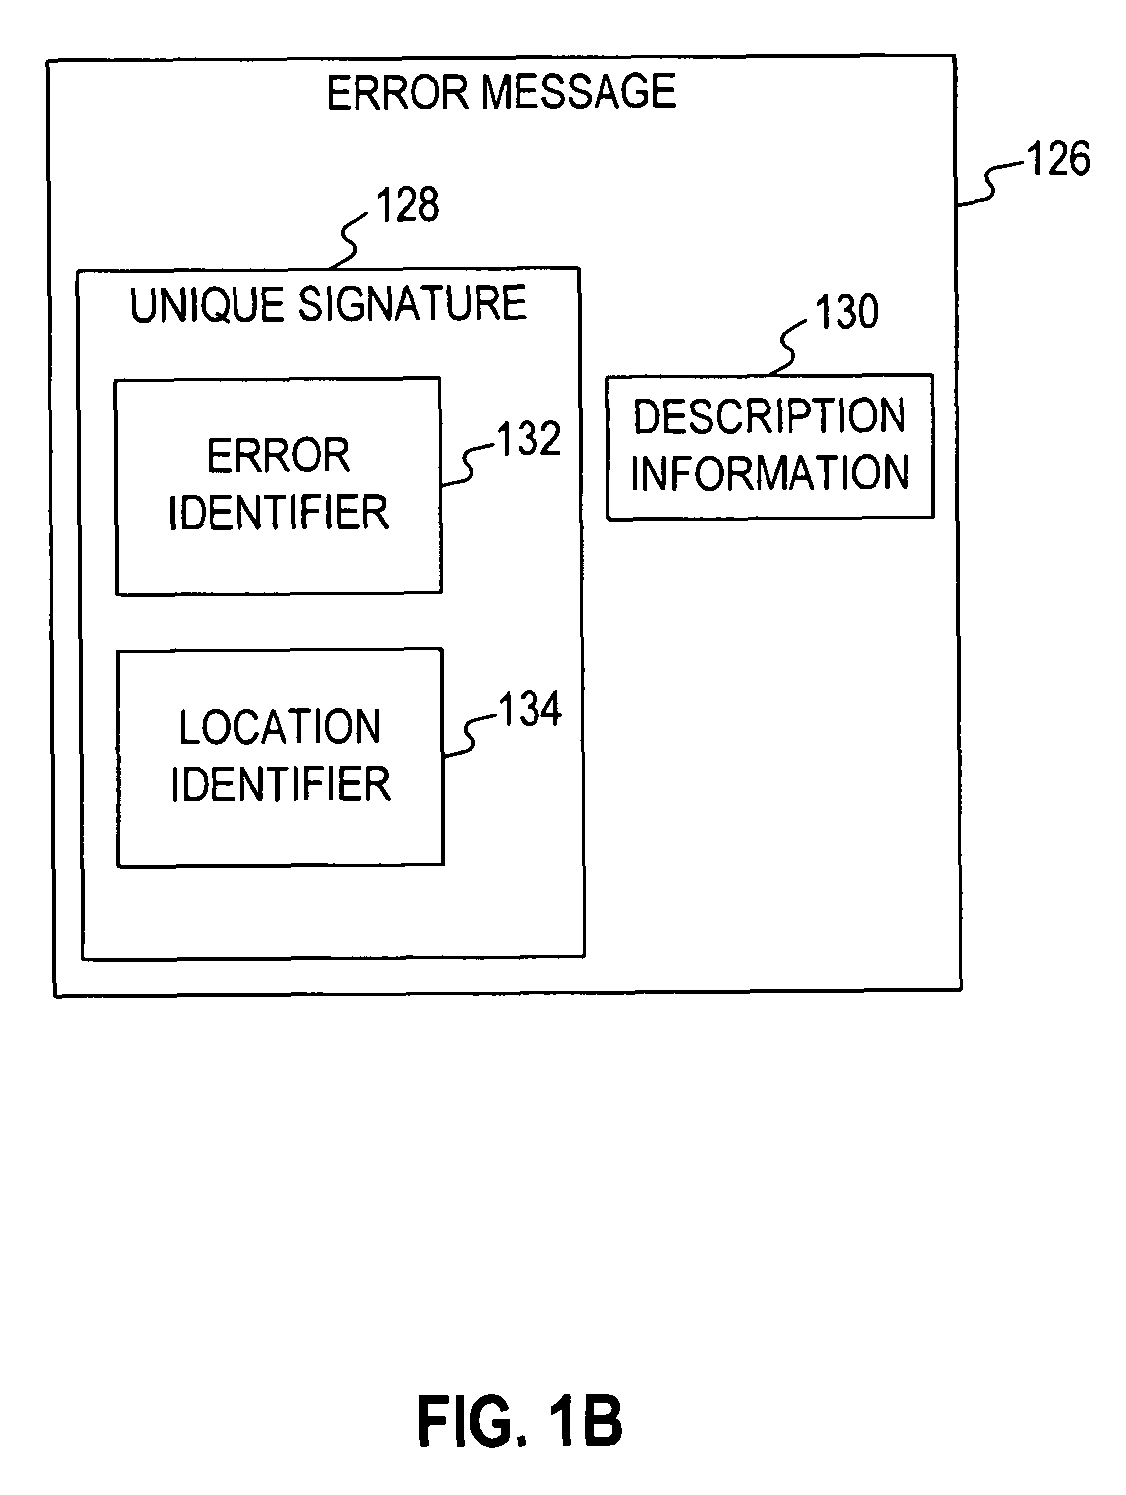 Systems and methods for correcting software errors